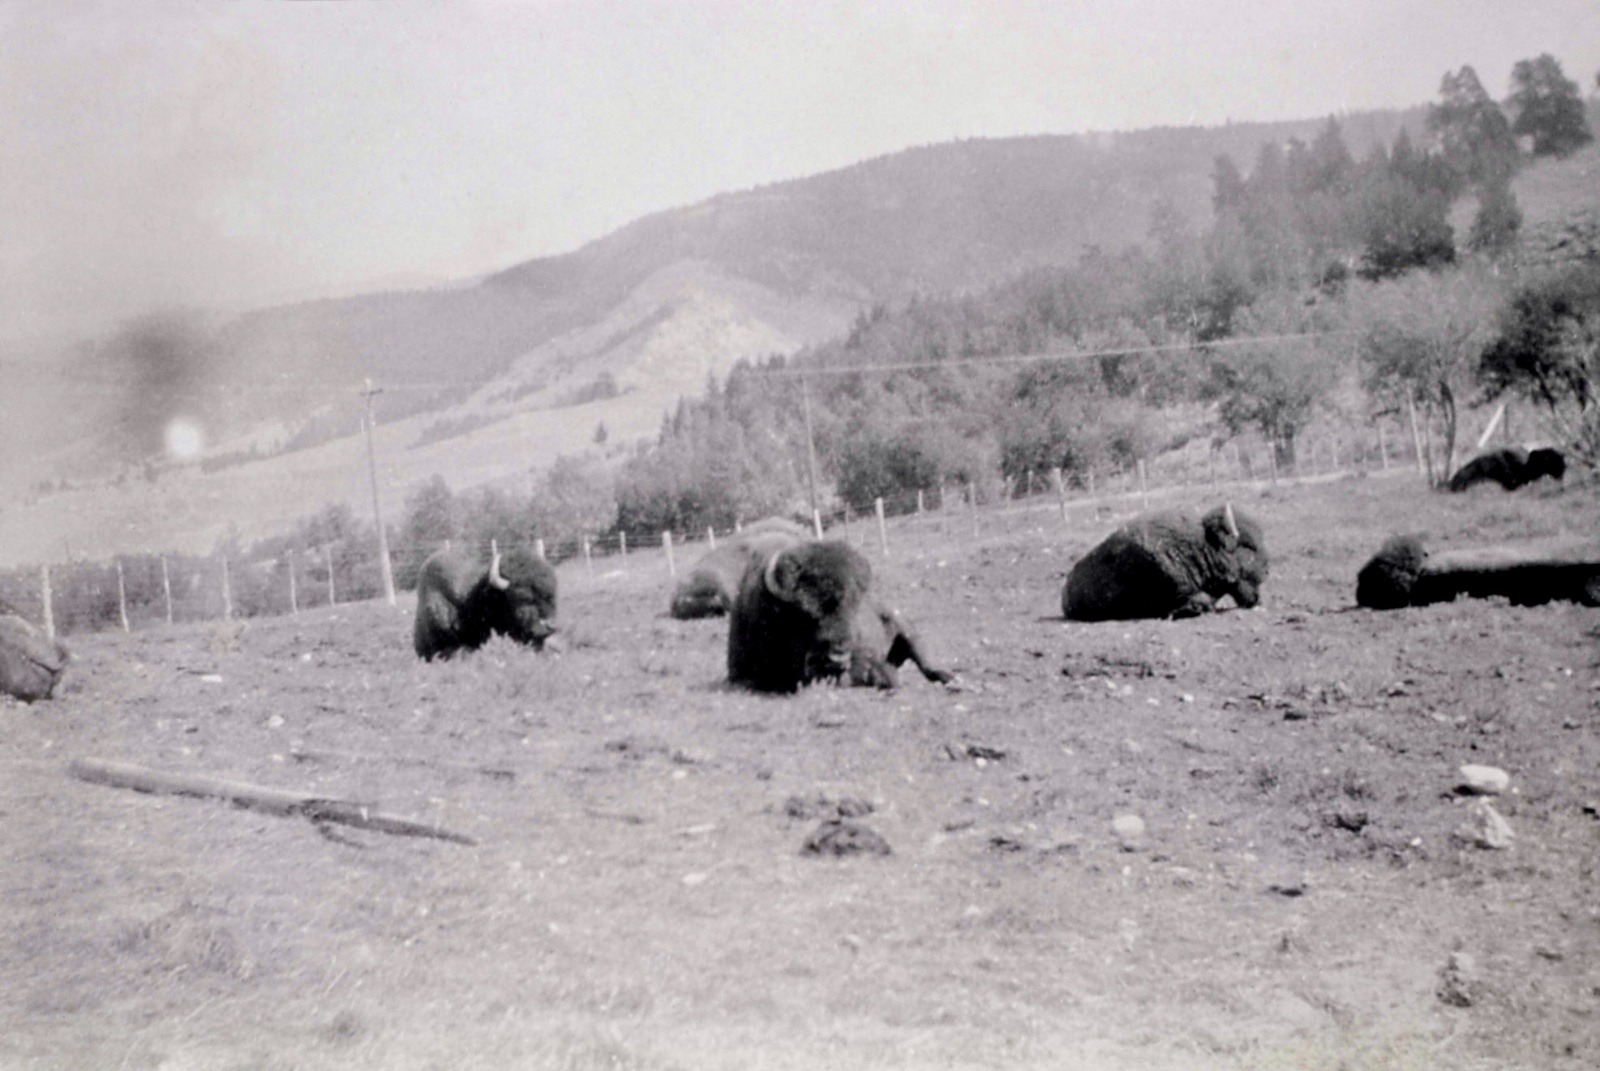 Top: Black bears, deliberately fed and habituated to human food, provide entertainment for park visitors at West Thumb Camp in 1924. Photo just above: Bison in the "Mammoth Showpen" in 1924 when wildlife, in order to insure visitors saw animals, were really managed as if in a glorified zoo.  Photographer unknown/courtesy NPS